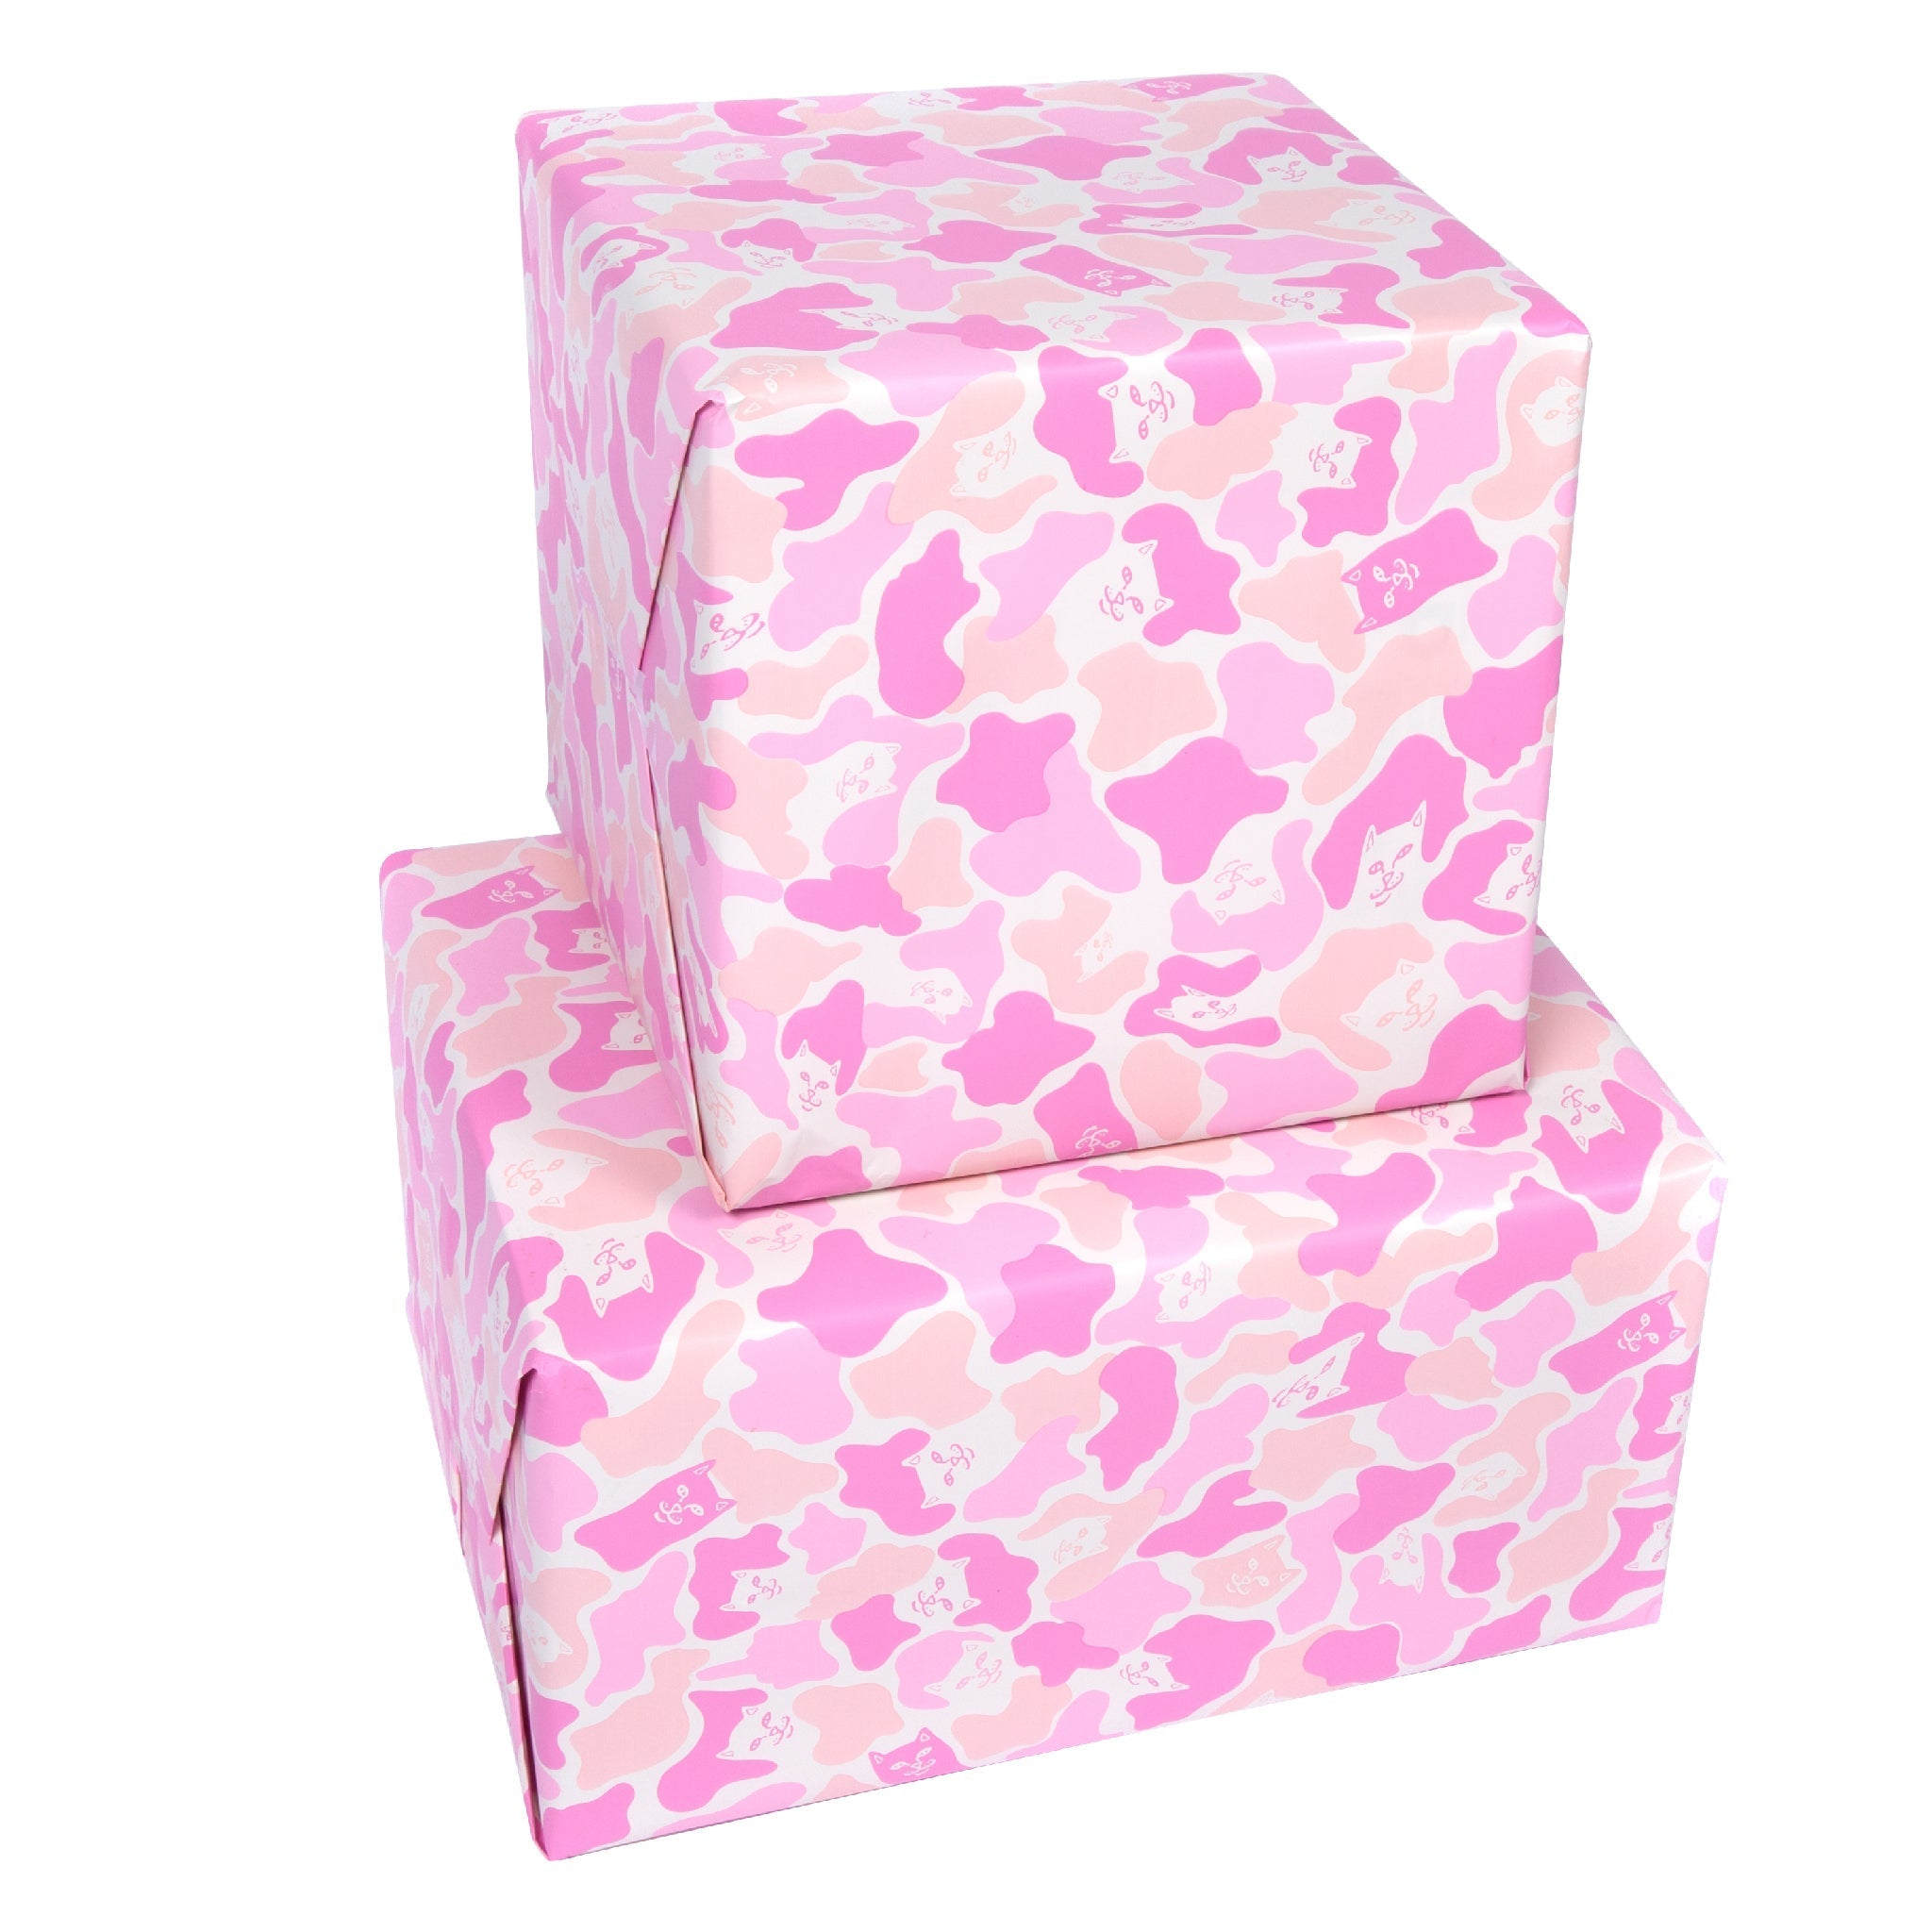 Nermal Camo Wrapping Paper (Pink Camo)